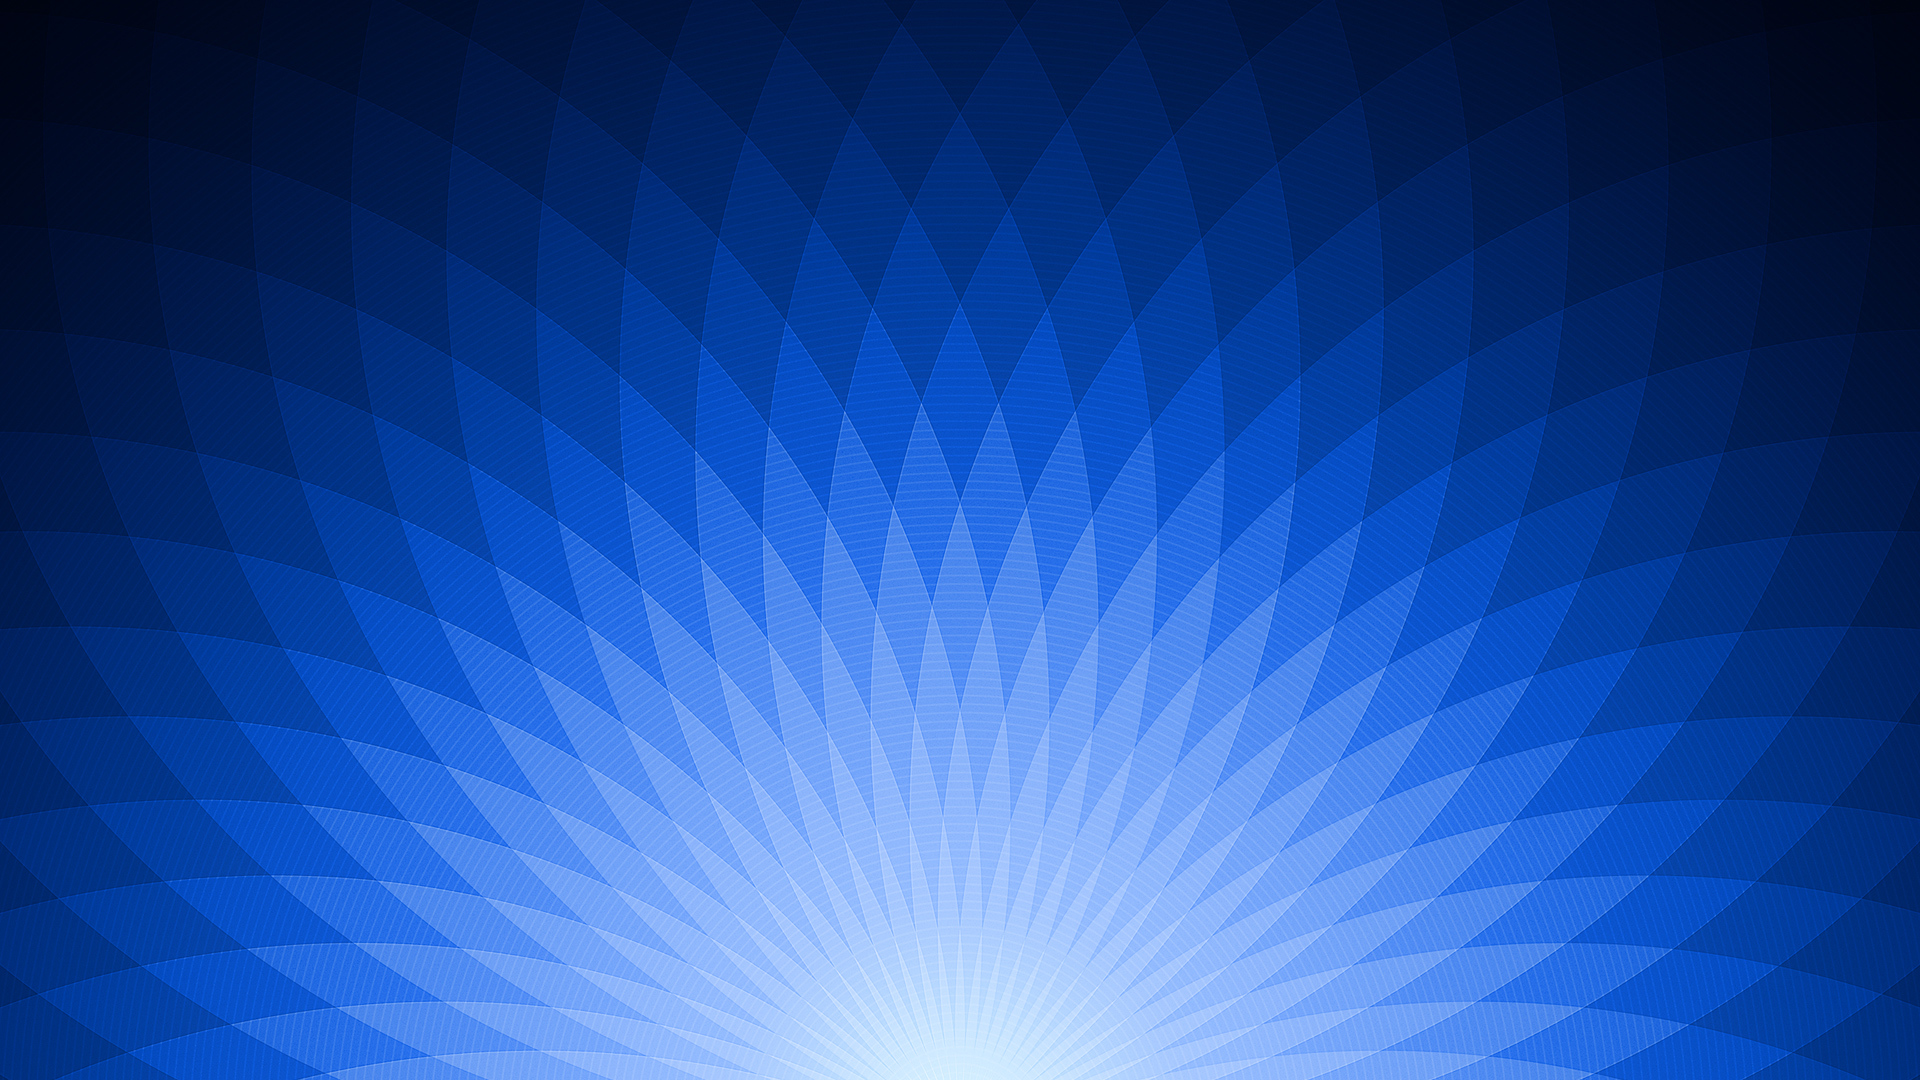 Popular Blue Image for Phone